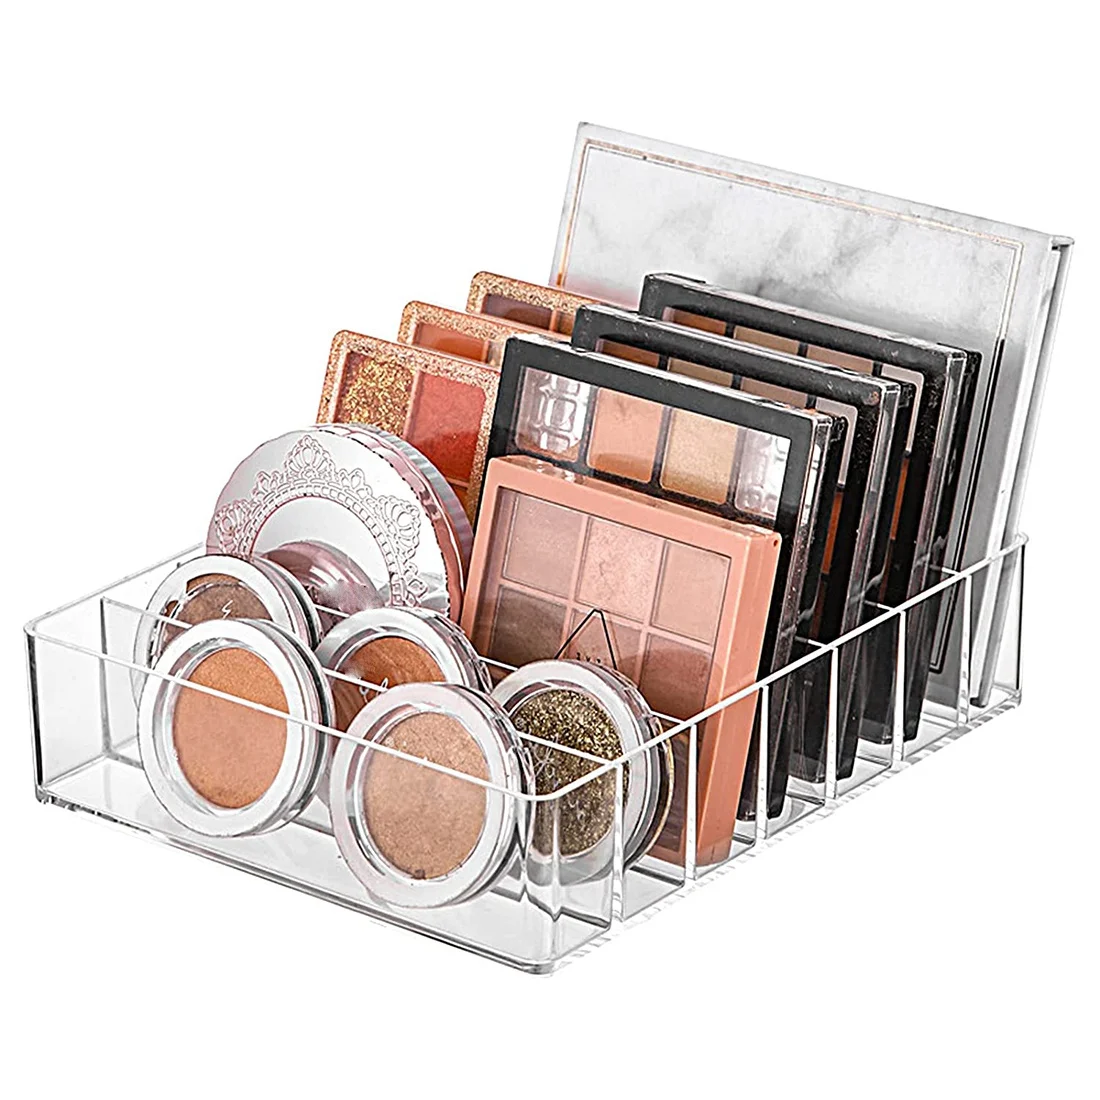 

Eyeshadow Palette Organizer- 7 Section Divided Makeup Acrylic Palette Organizer Holder for Vanity Cosmetics Makeup